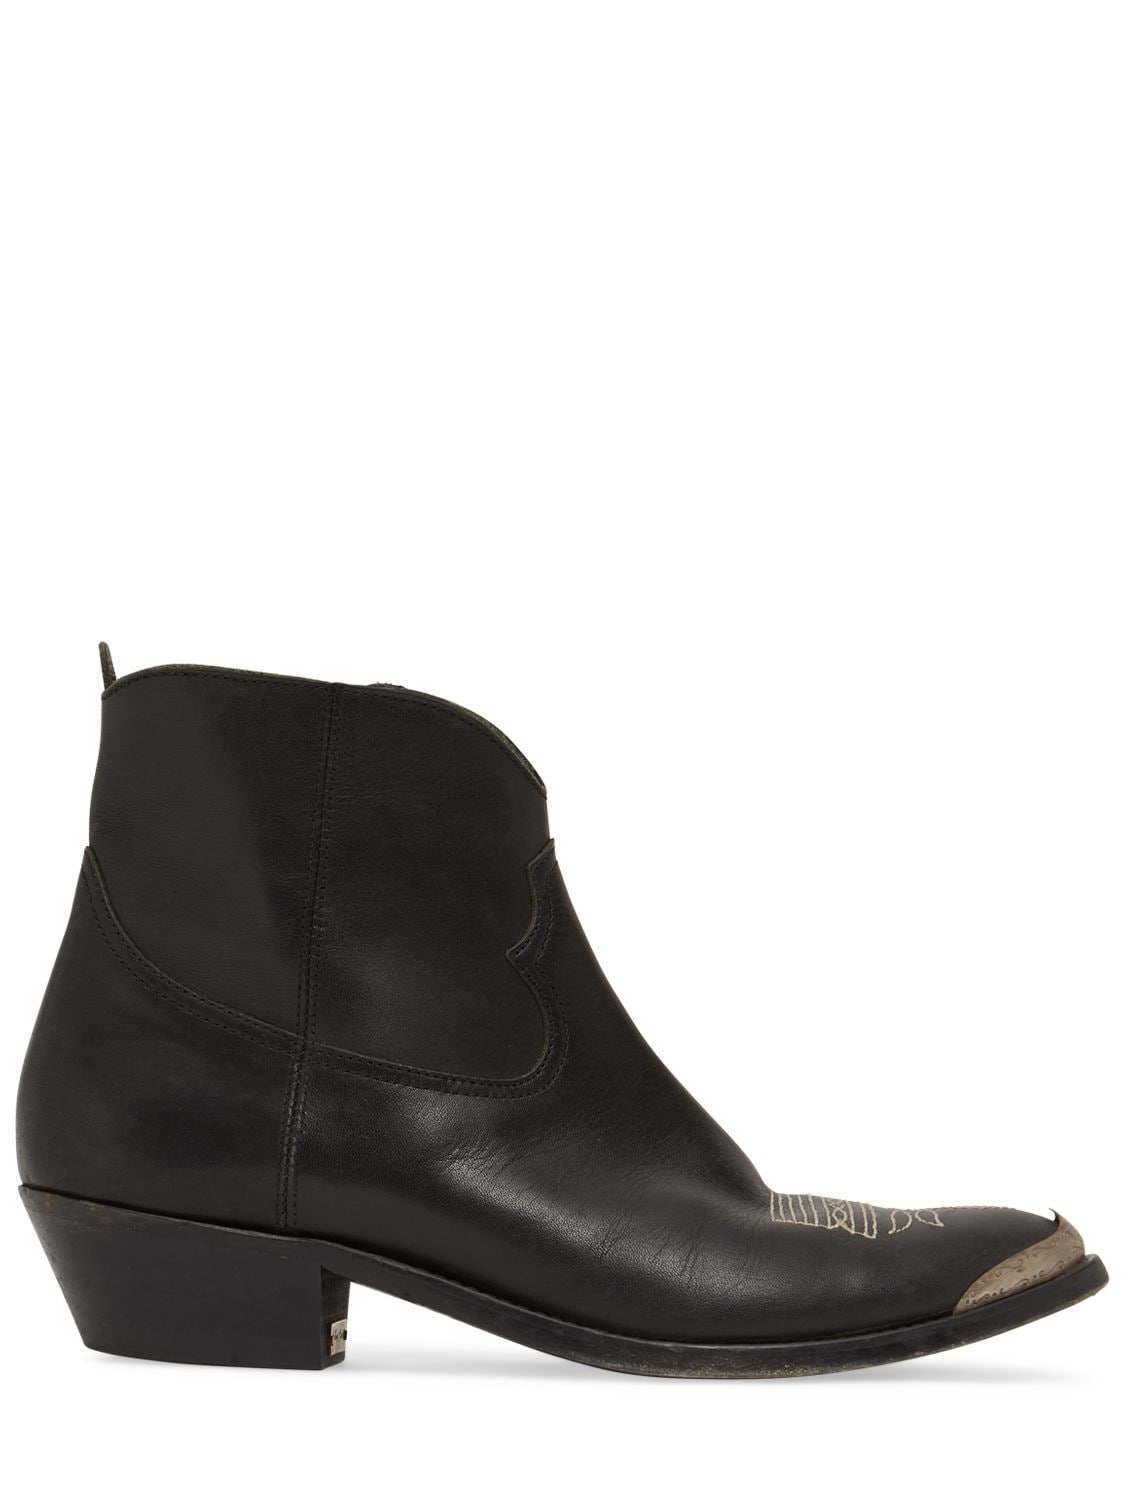 Golden Goose young leather cowboy ankle boots - Black